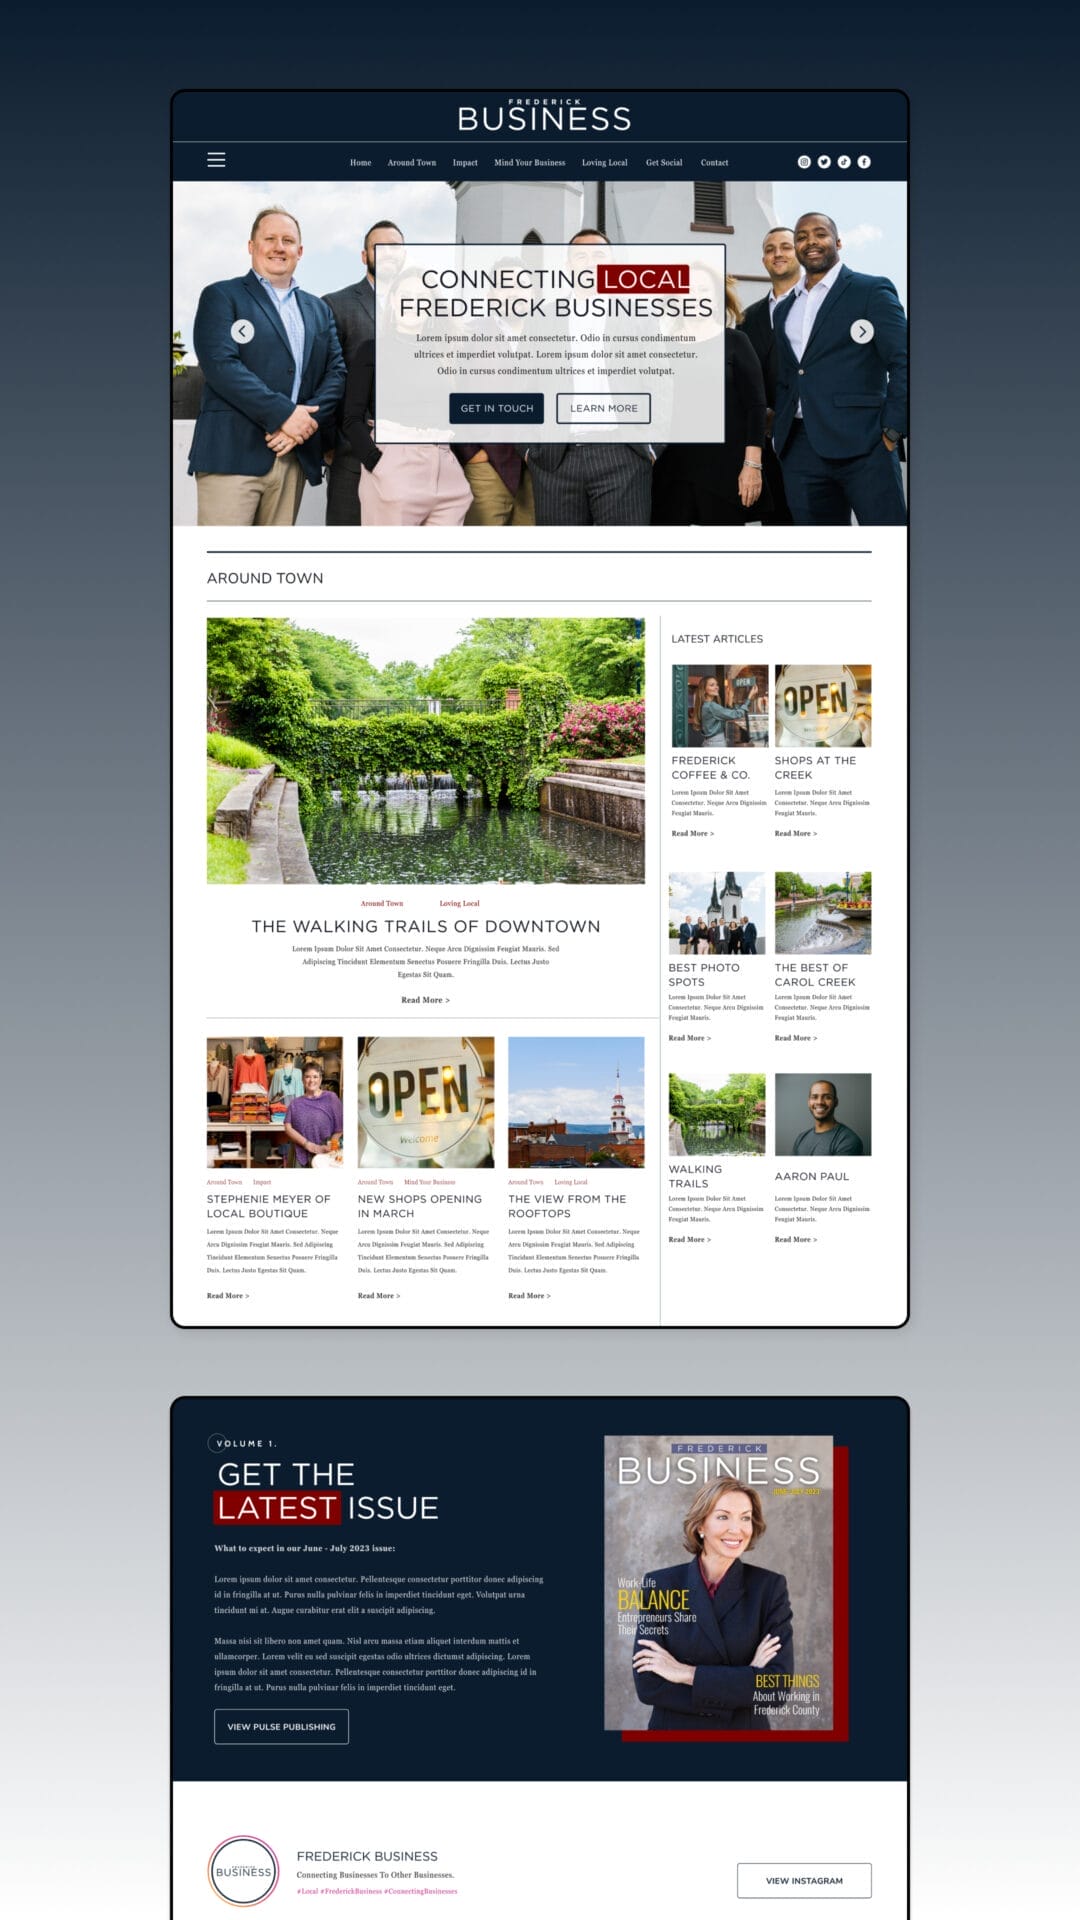 A website design for a law firm.